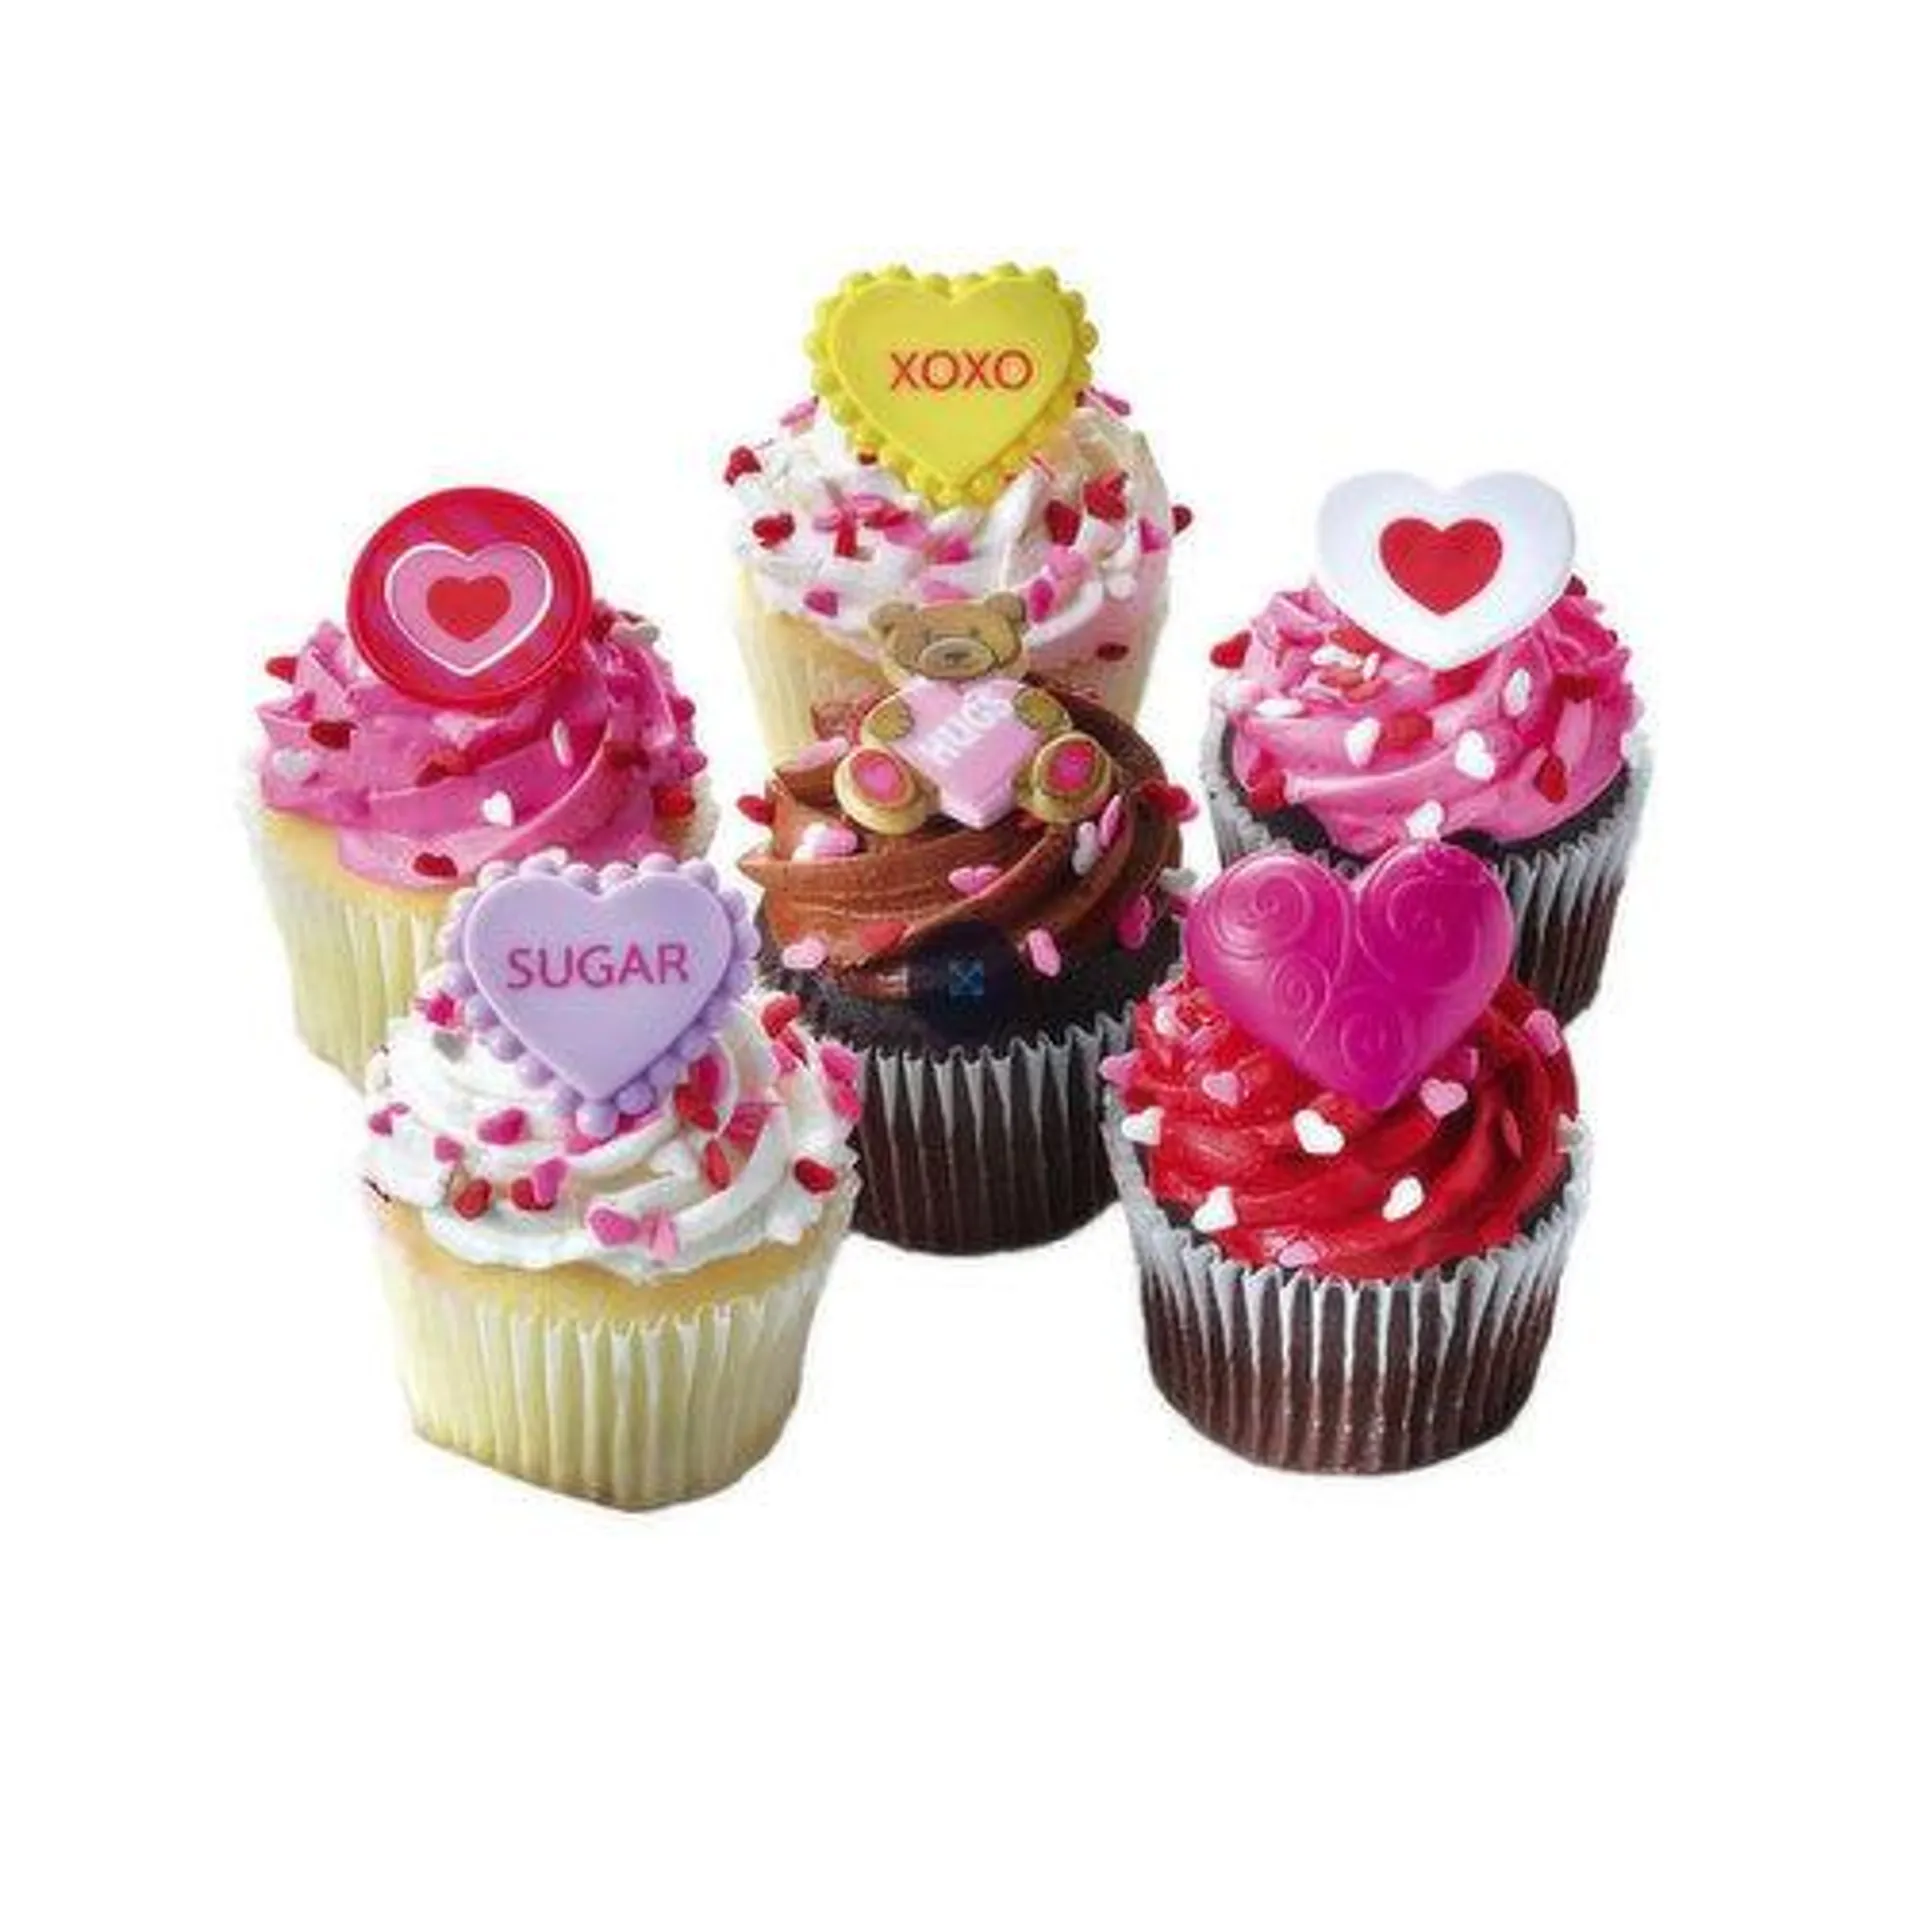 Cub Bakery Assorted Cupcakes with Buttercream Icing, 6 Each